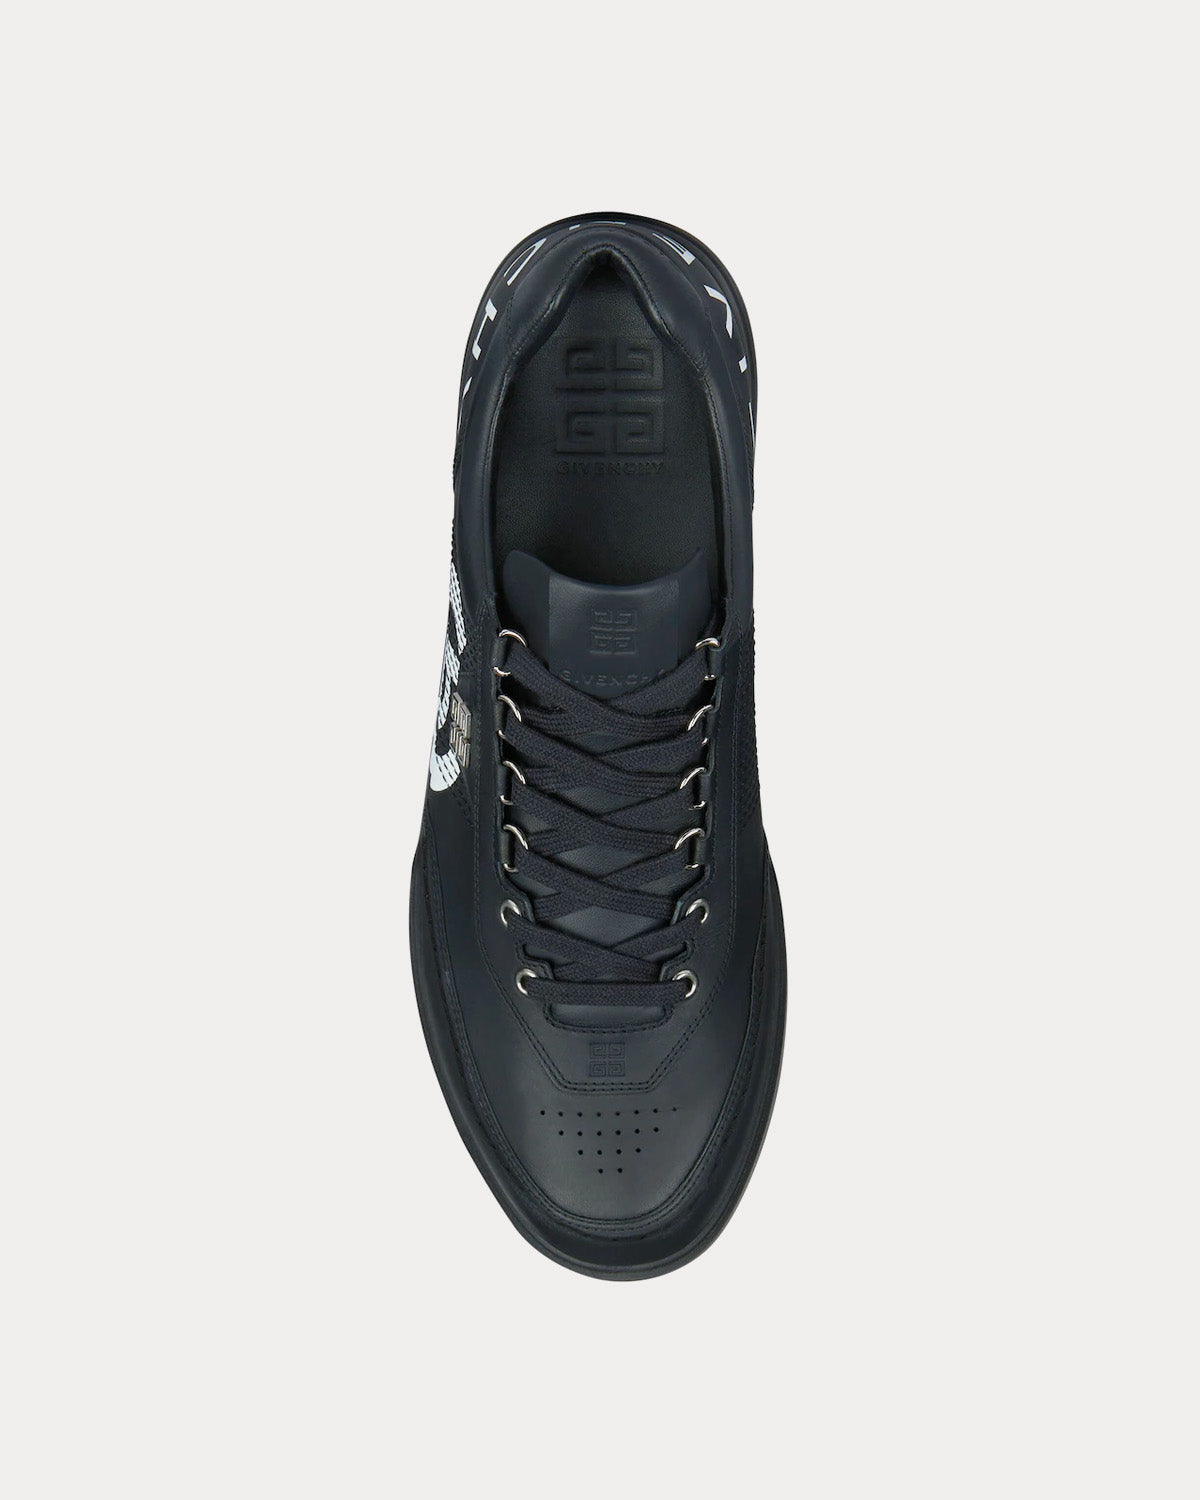 Givenchy x BSTROY - G4 Leather Black Low Top Sneakers